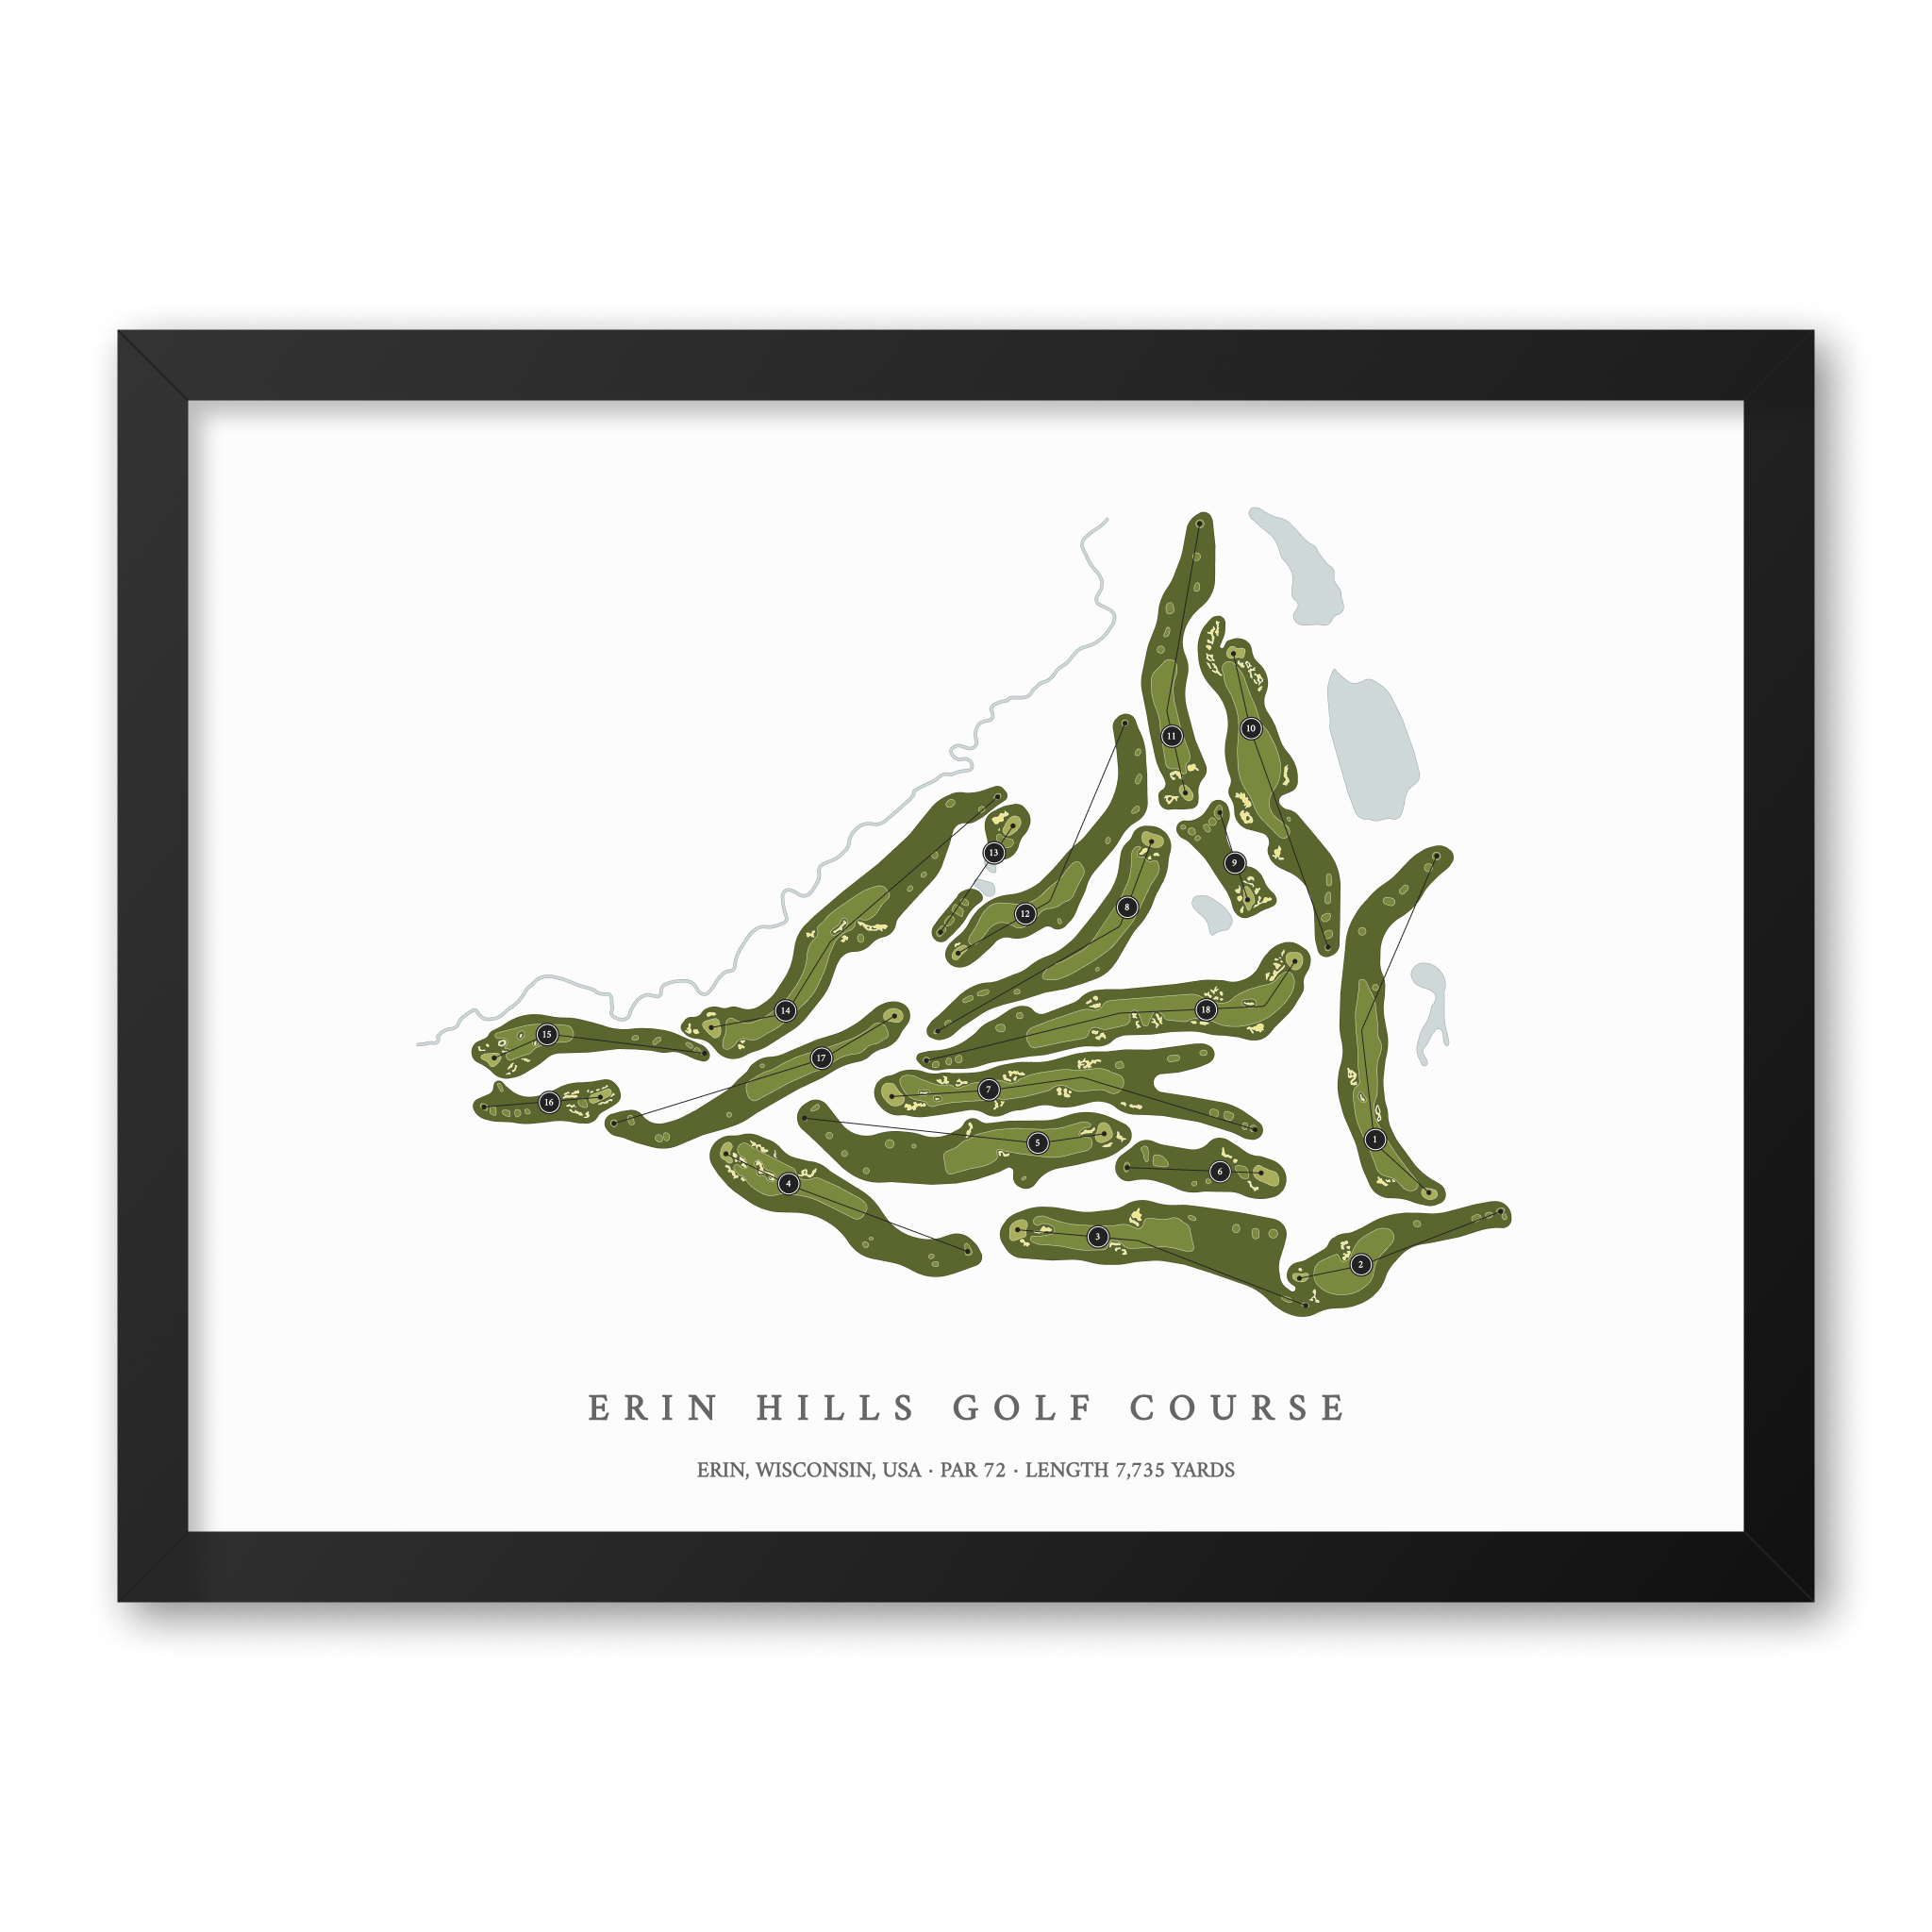 Erin Hills Golf Course| Golf Course Print | Black Frame With Hole Numbers #hole numbers_yes